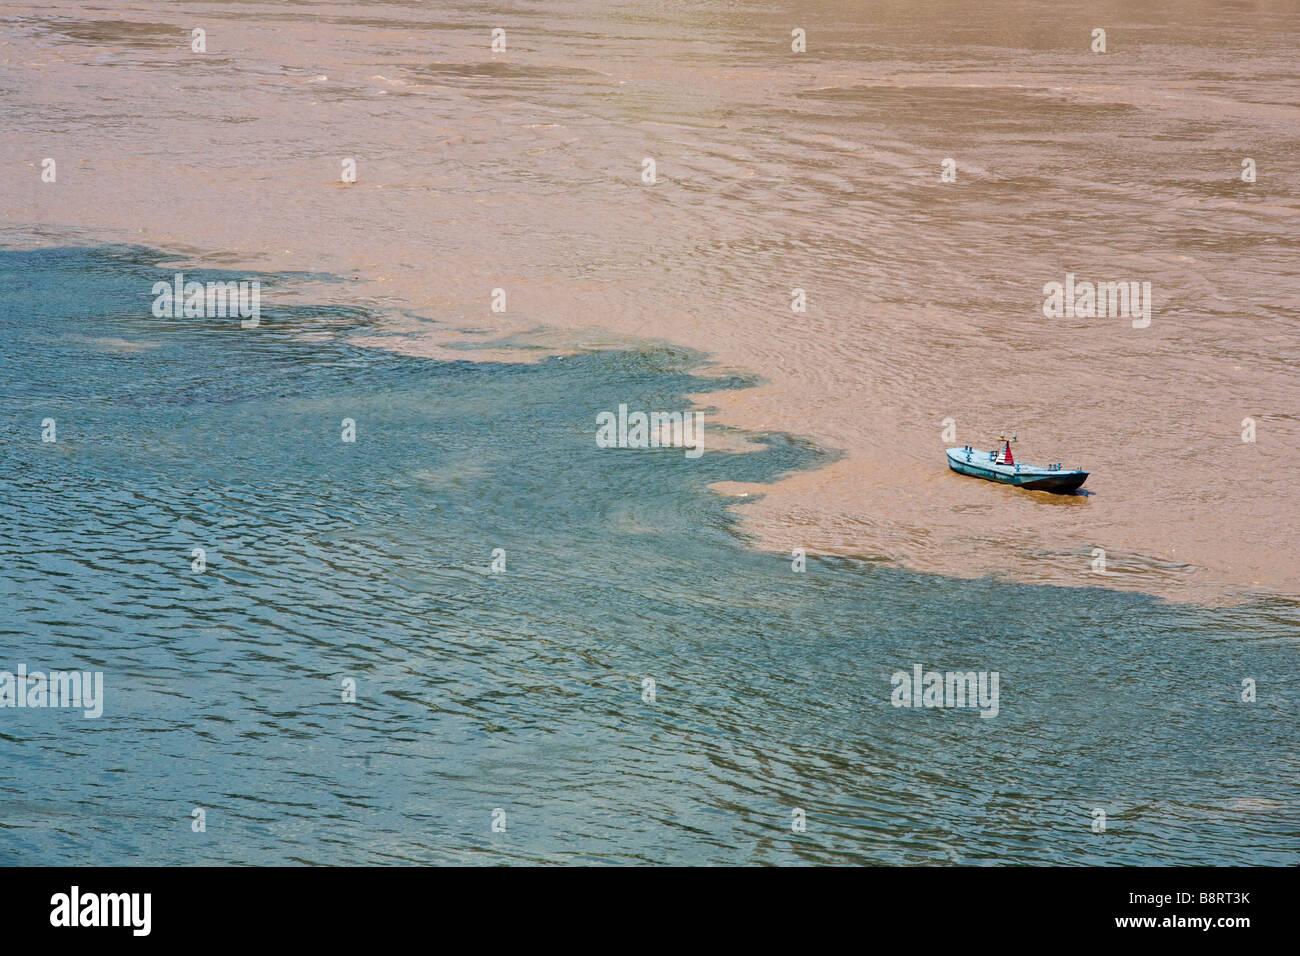 Small boat on the meeting of the brown Yangtze and the blue Jialing river waters in Chongqing city, southwestern China. Stock Photo